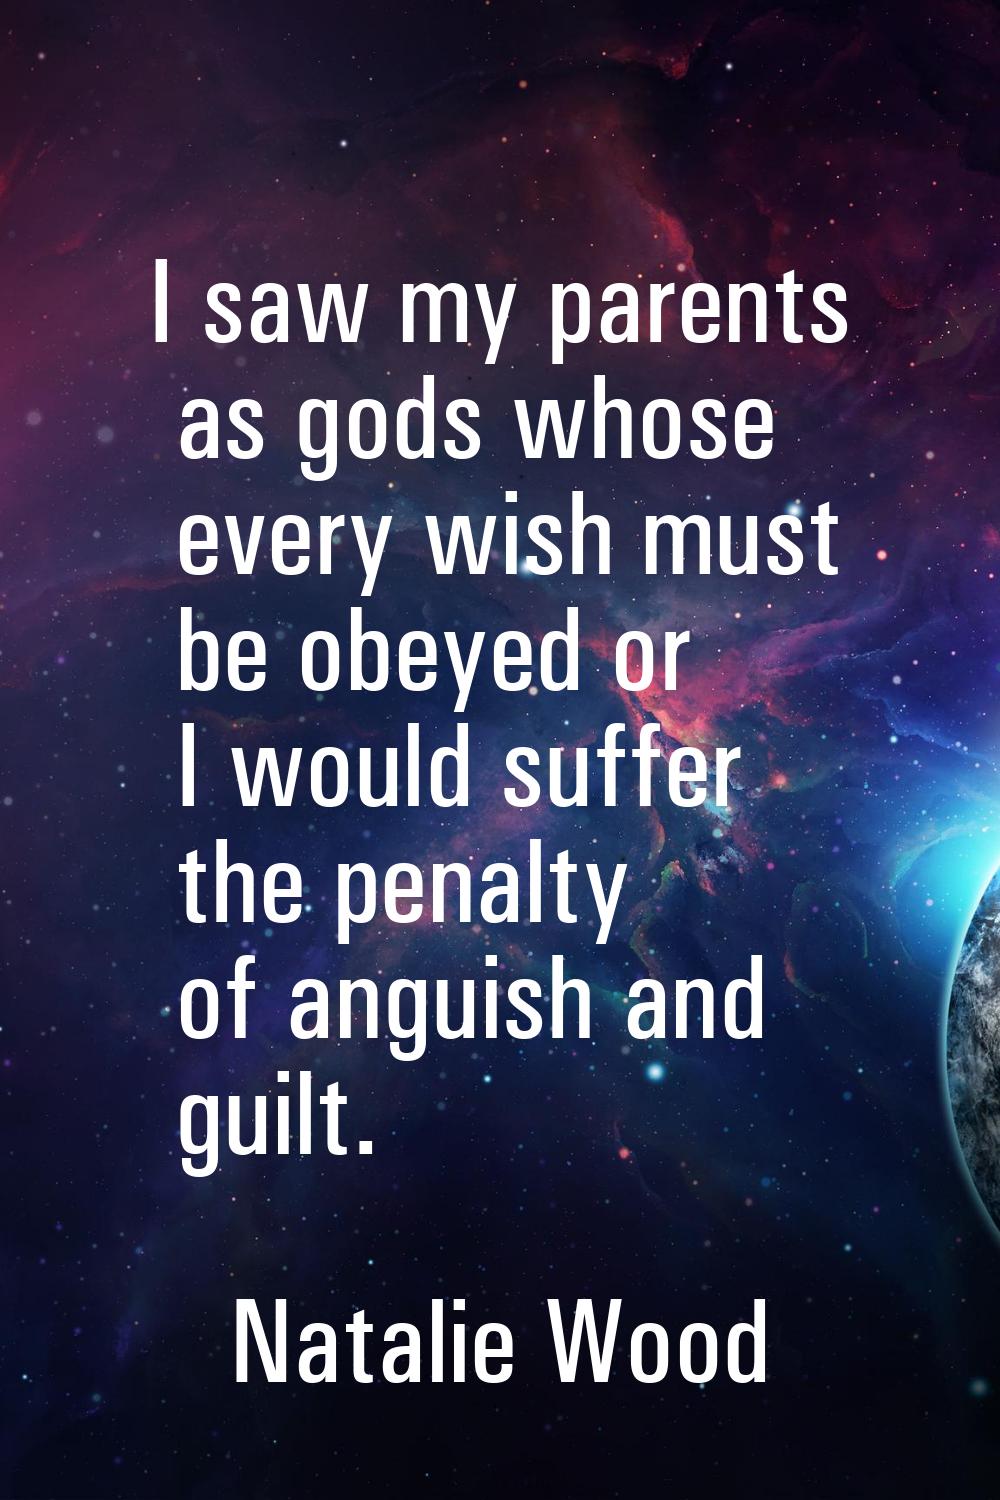 I saw my parents as gods whose every wish must be obeyed or I would suffer the penalty of anguish a